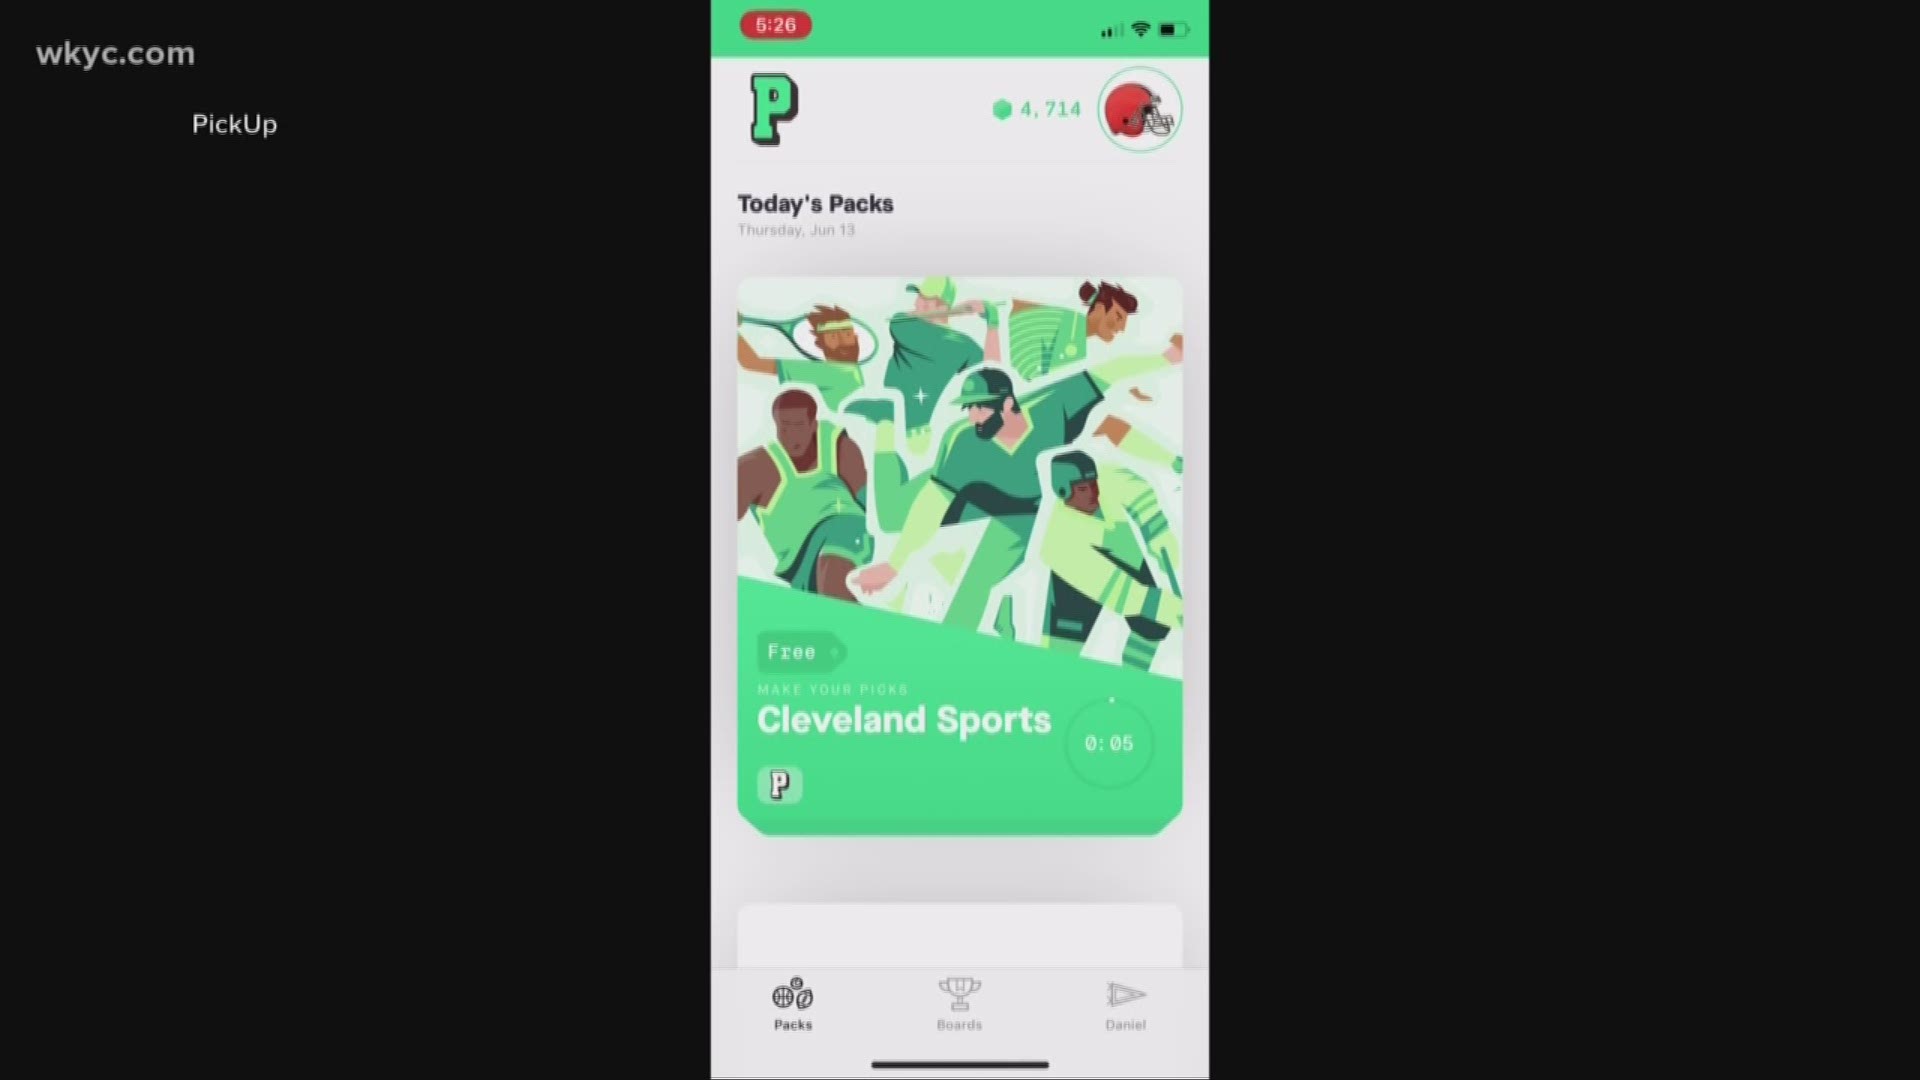 New sports app launching in Cleveland